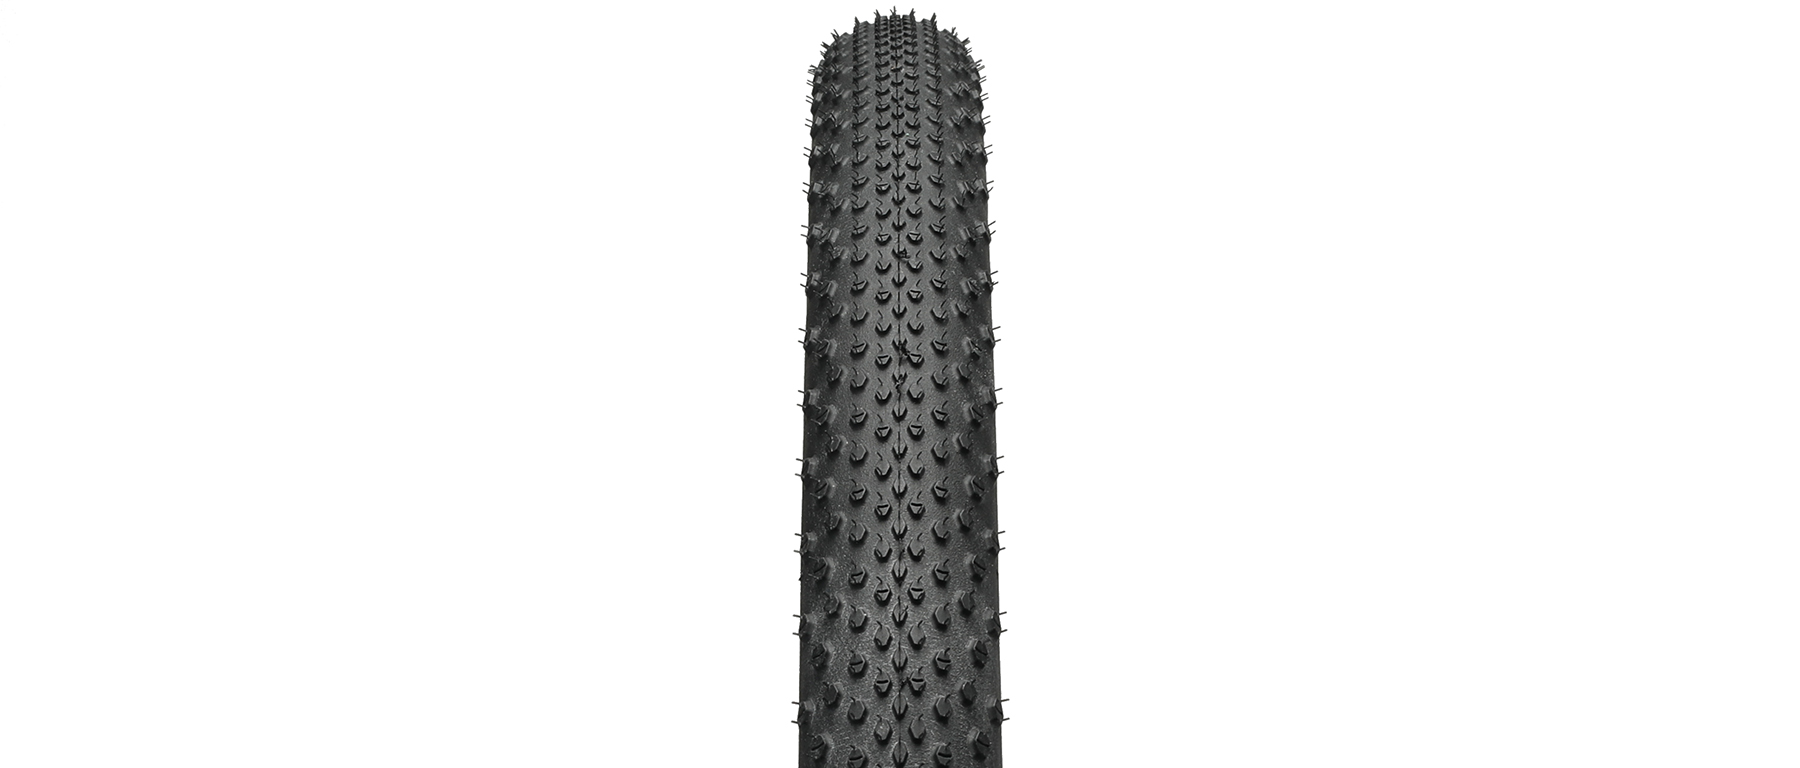 Continental Terra Speed Protection Tire